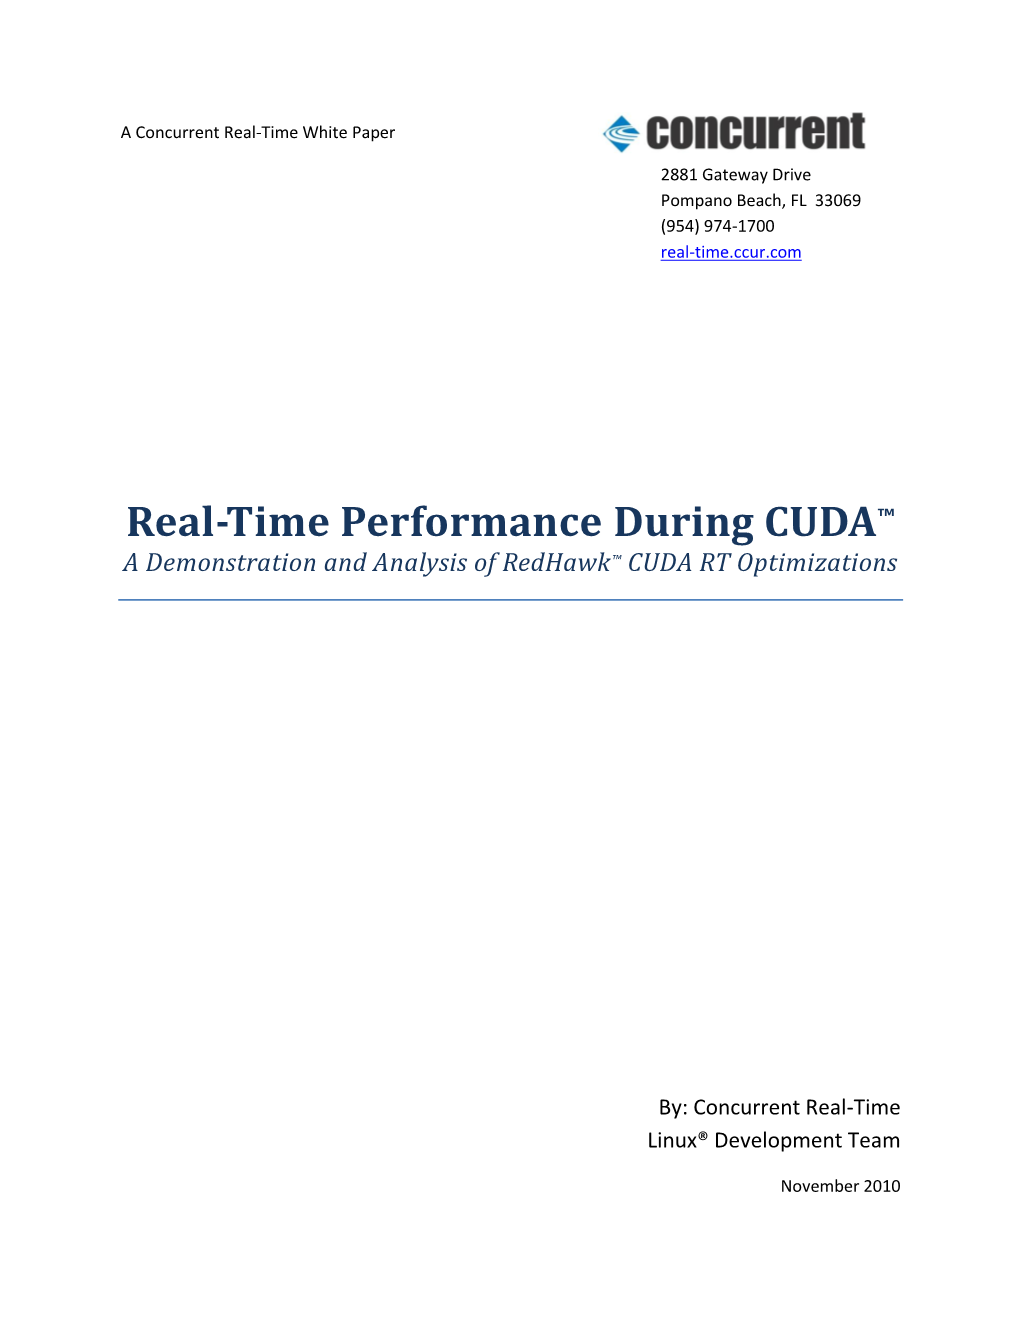 Real-Time Performance During CUDA™ a Demonstration and Analysis of Redhawk™ CUDA RT Optimizations